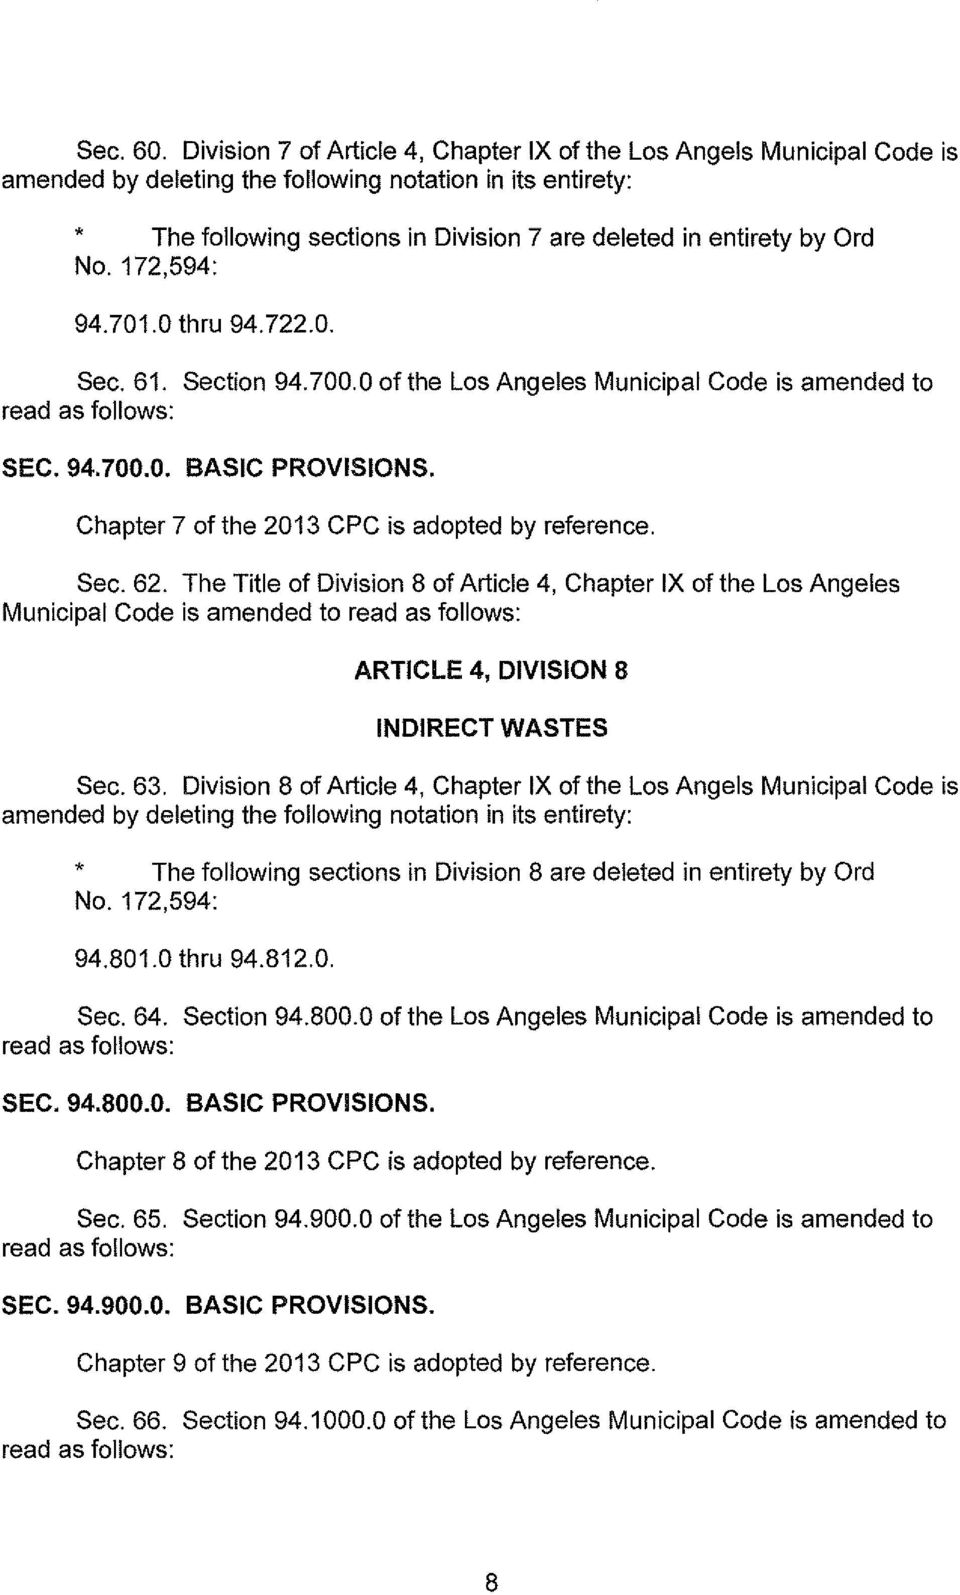 Ord No. 172,594: 94.701.0 thru 94.722.0. Sec. 61. SEC. 94.700.0. Section 94.700.0 of the Los Angeles Municipal Code is amended to BASIC PROVISIONS. Chapter 7 of the 2013 CPC is adopted by reference.